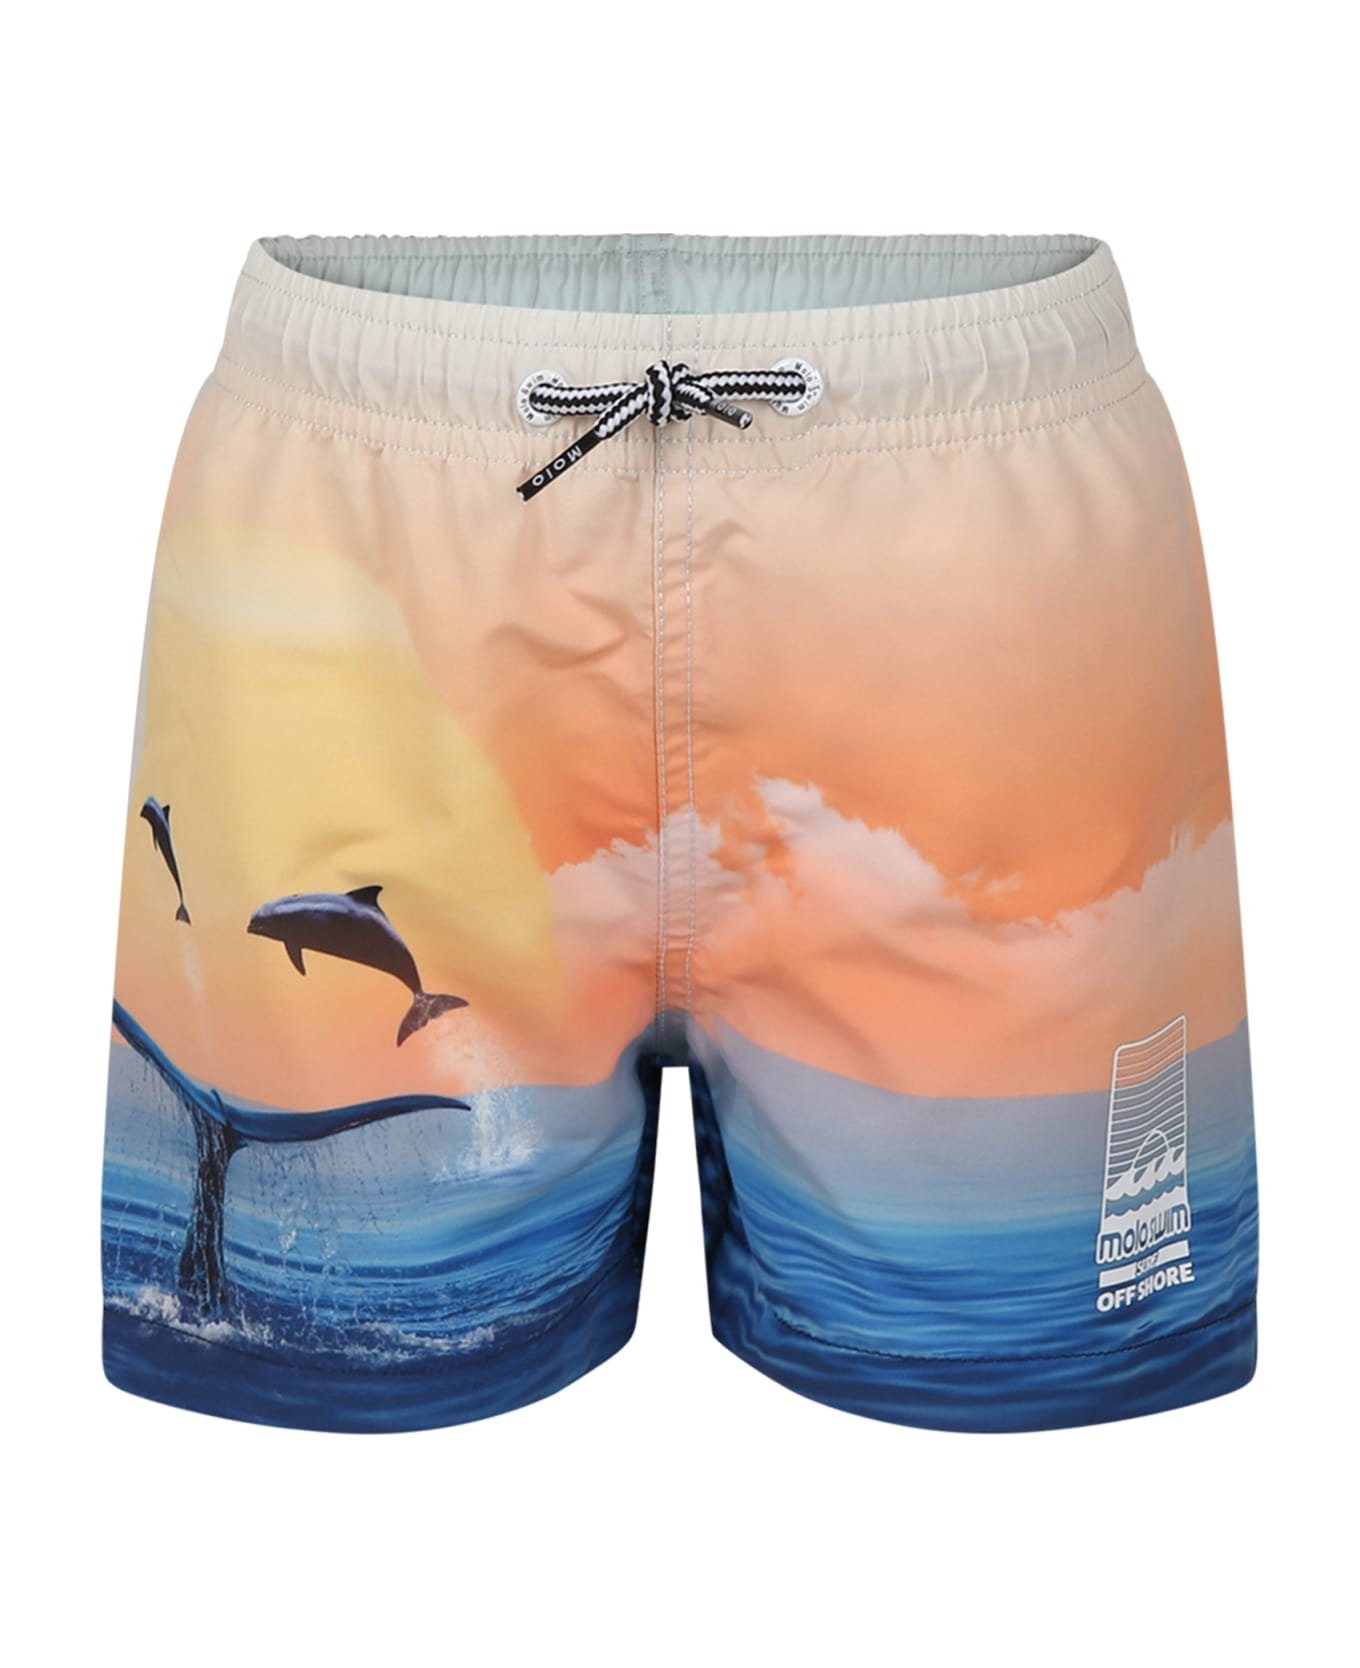 Molo Orange Swimsuit For Boy With Dolphins - Multicolor 水着